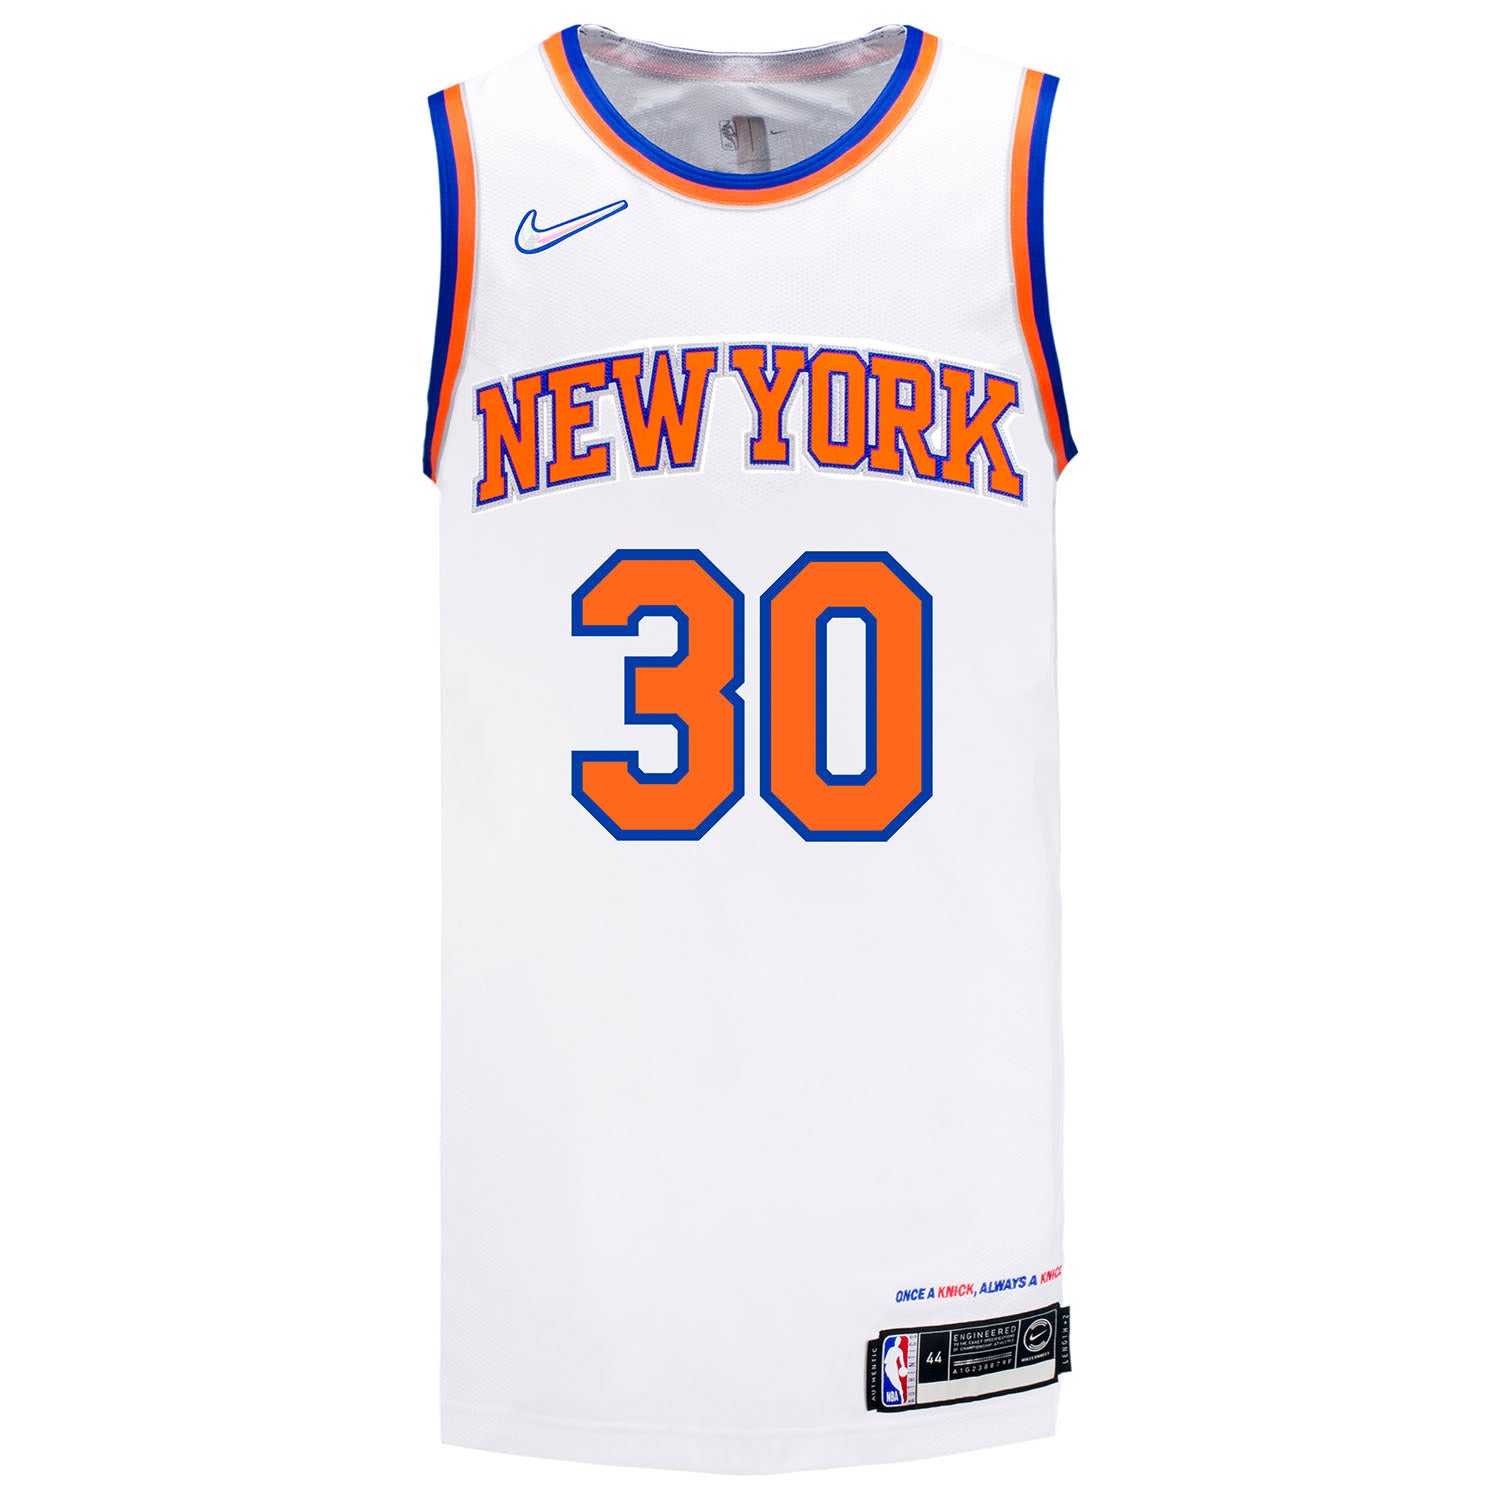 Official NBA Authentic Jerseys, NBA Official Nike Jersey